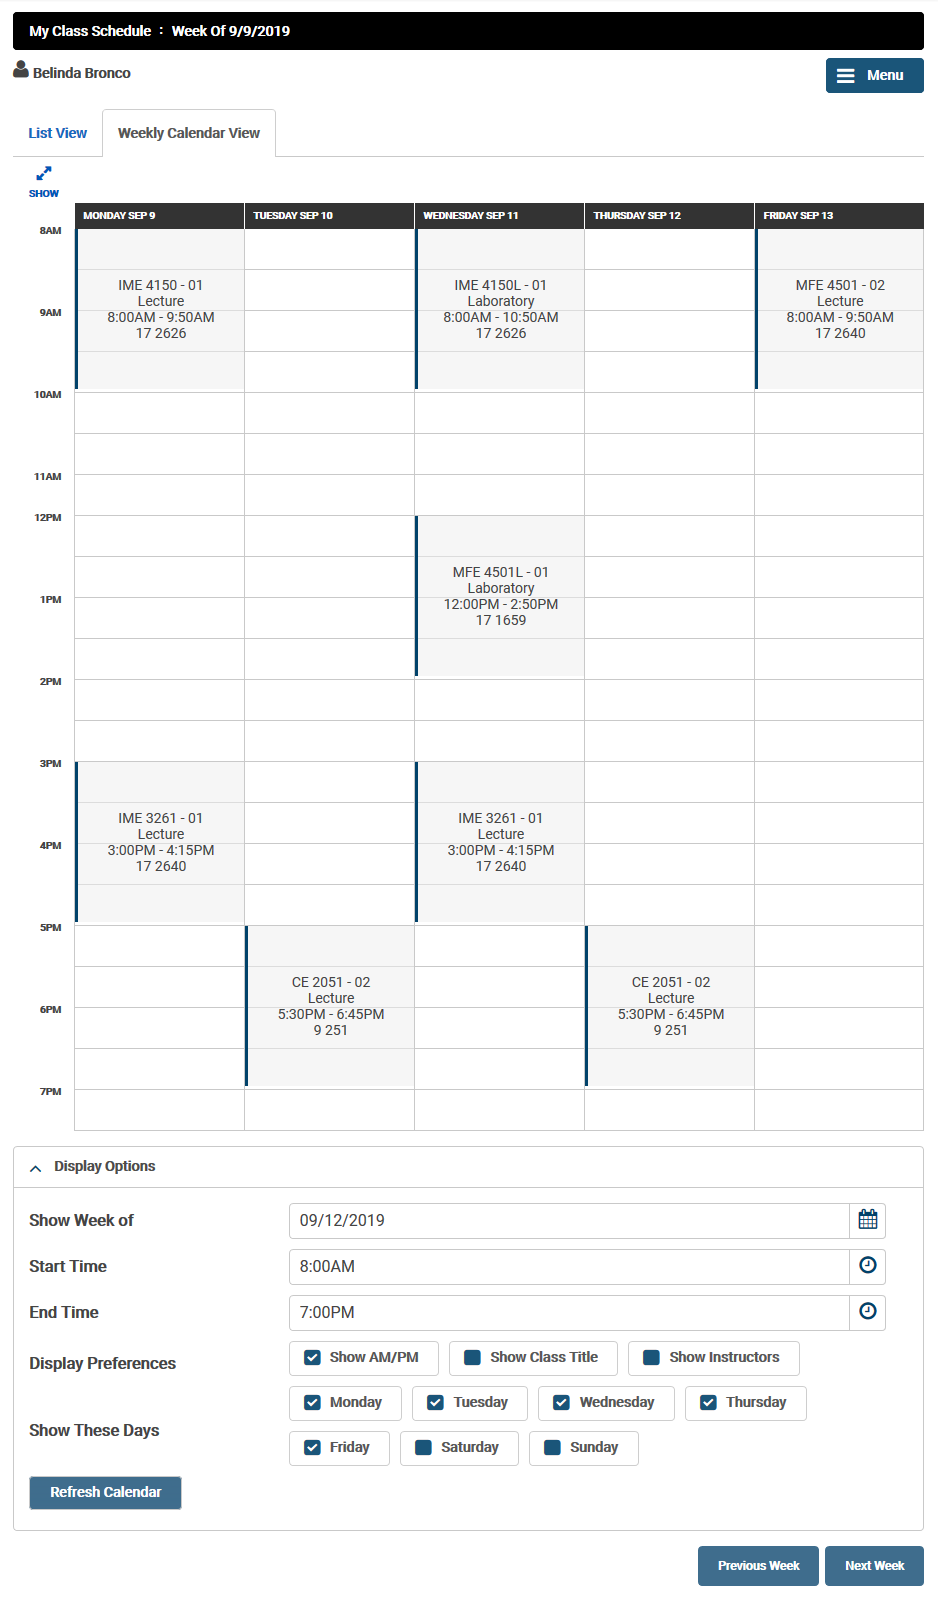 My Class Schedule in BroncoDirect Beta